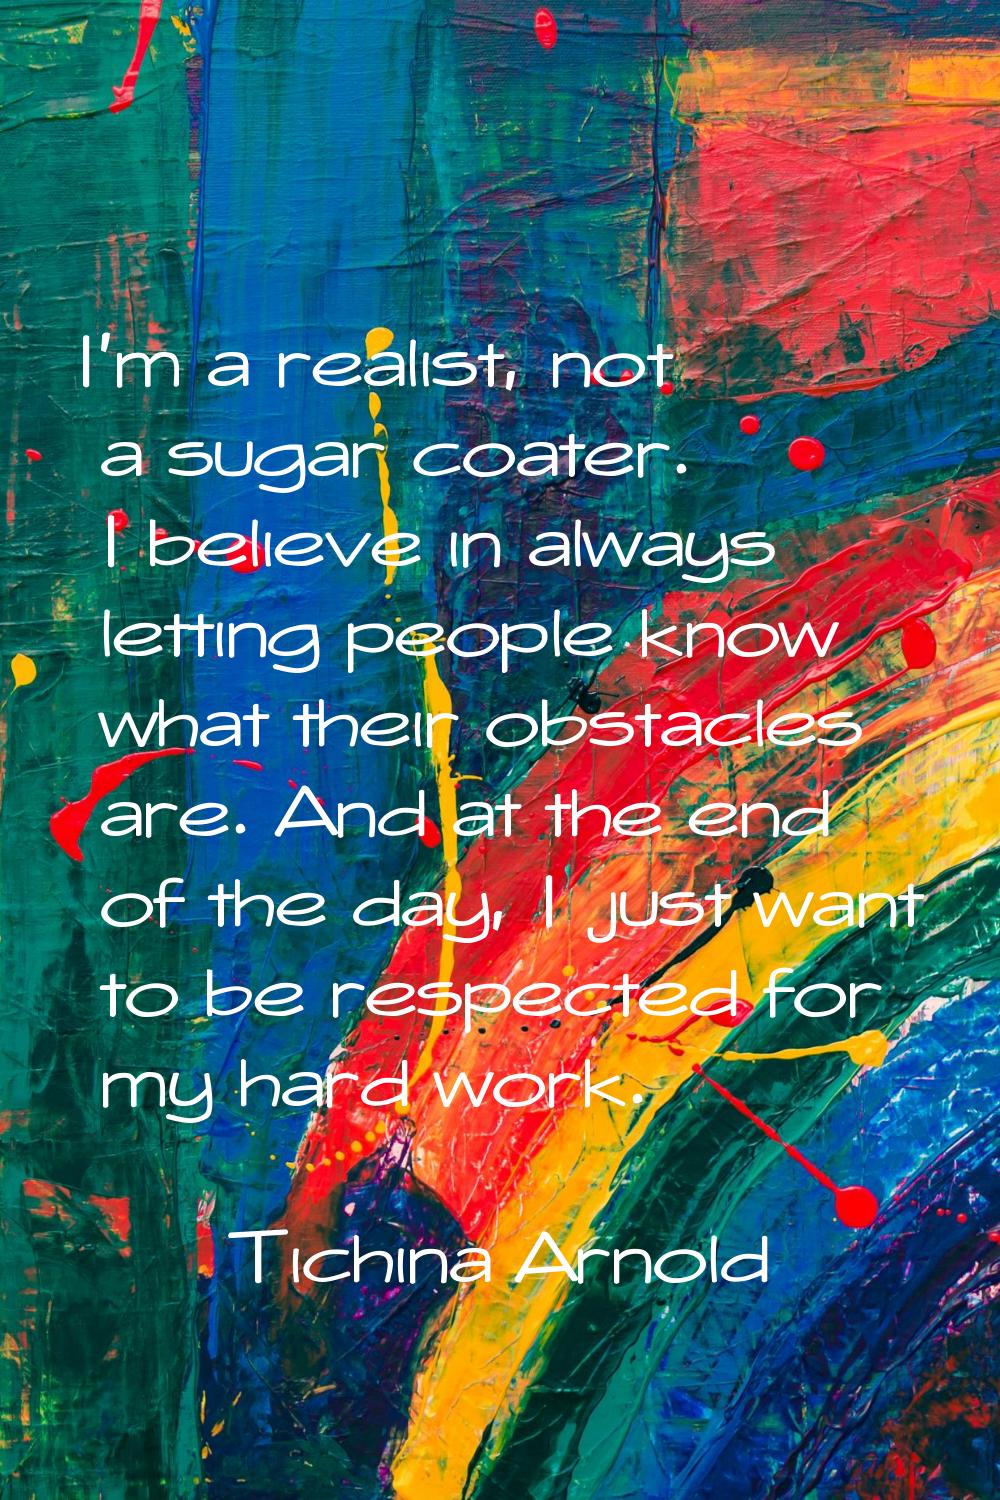 I'm a realist, not a sugar coater. I believe in always letting people know what their obstacles are